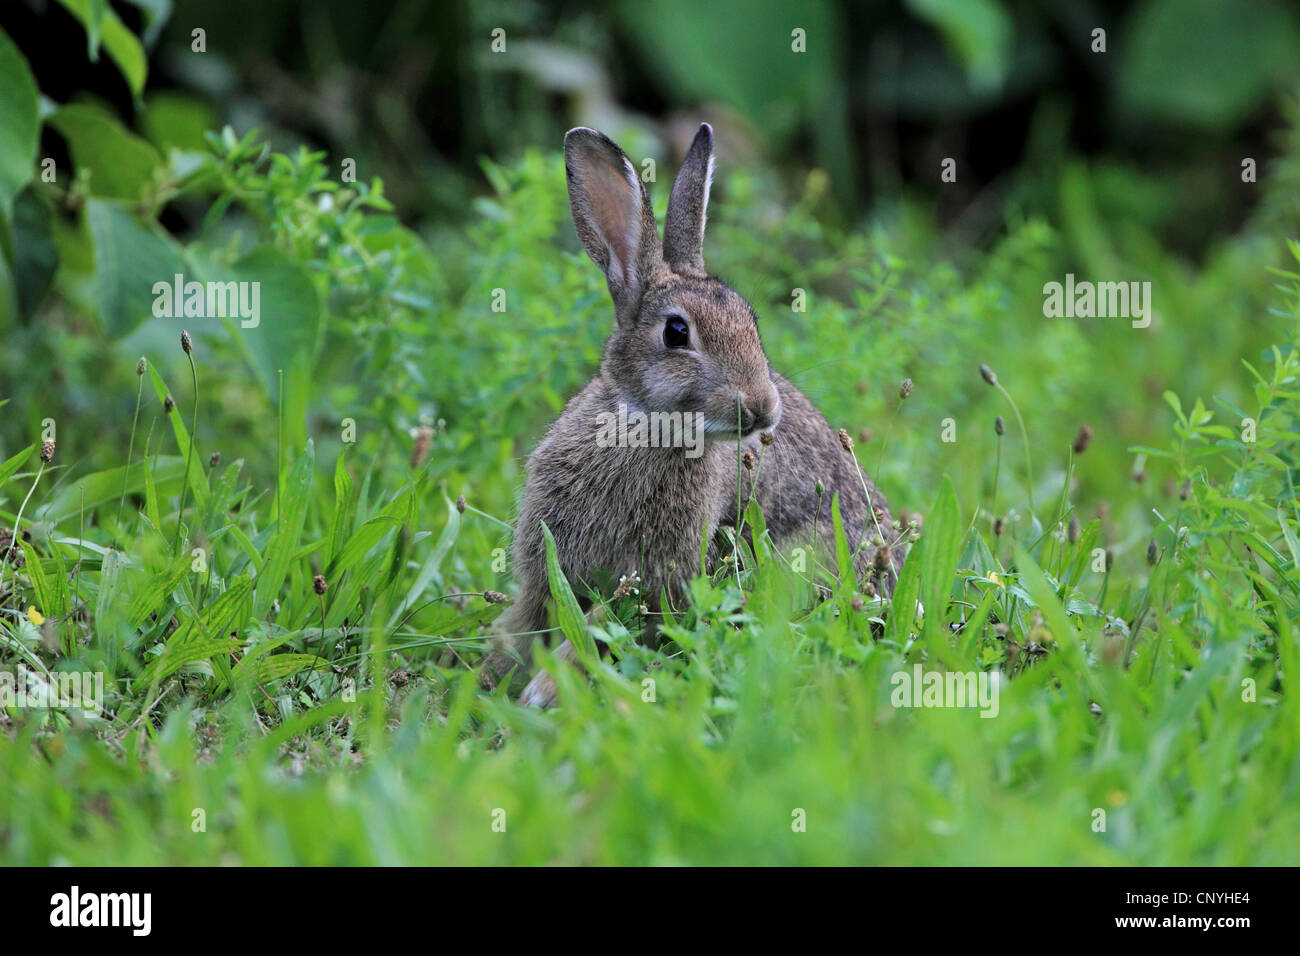 European rabbit (Oryctolagus cuniculus), sitting in grass, Germany Stock Photo